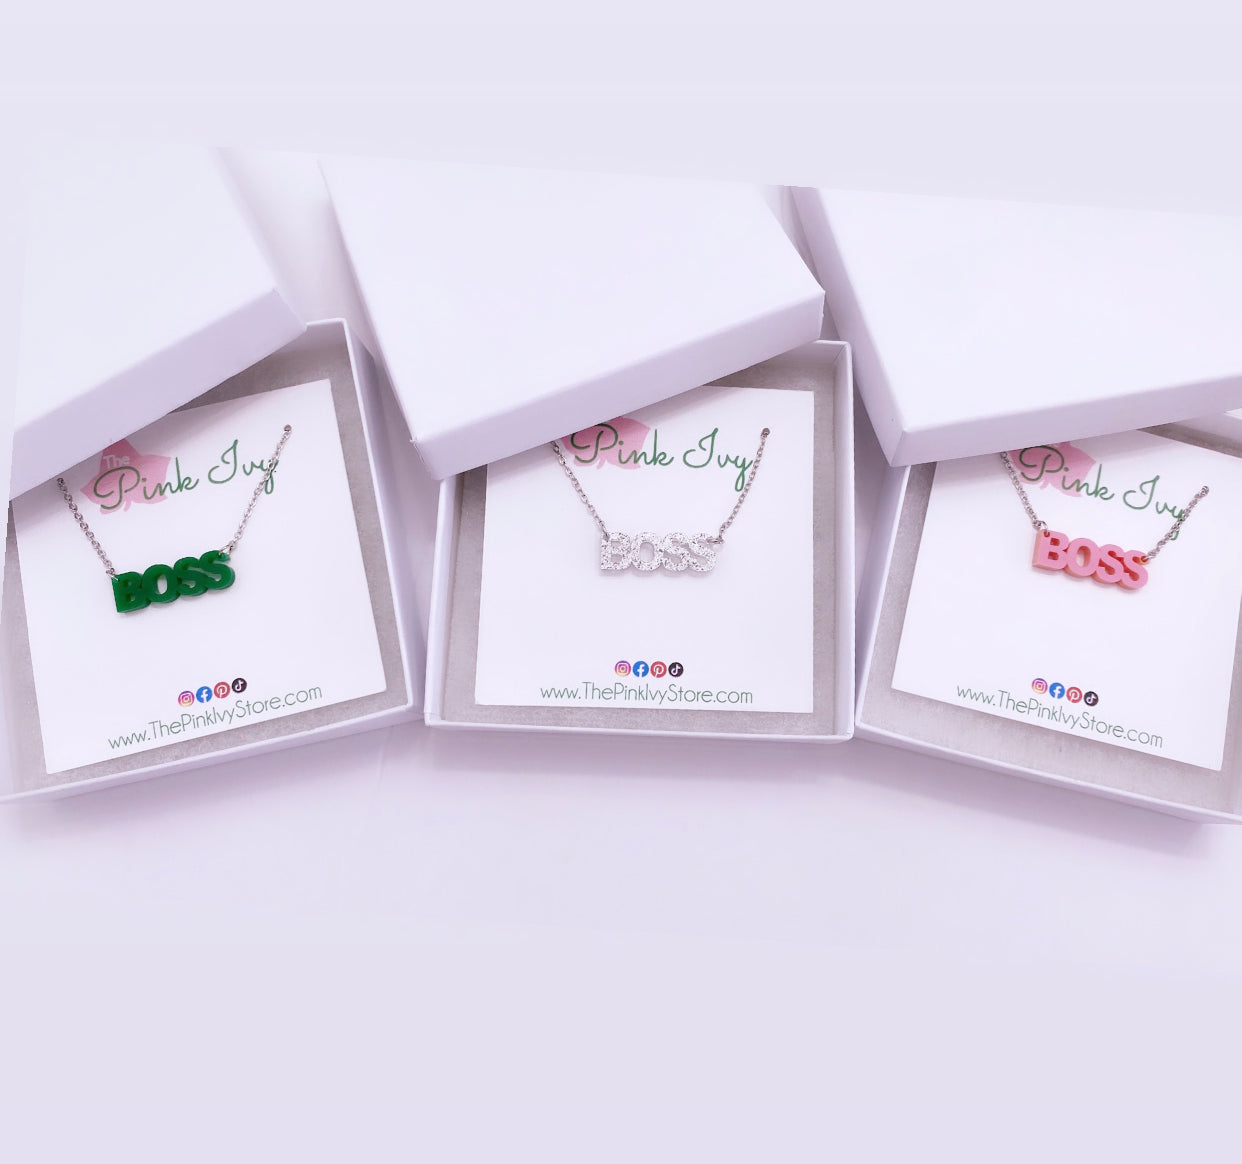 Boss necklaces available in white silver, pink, and green.